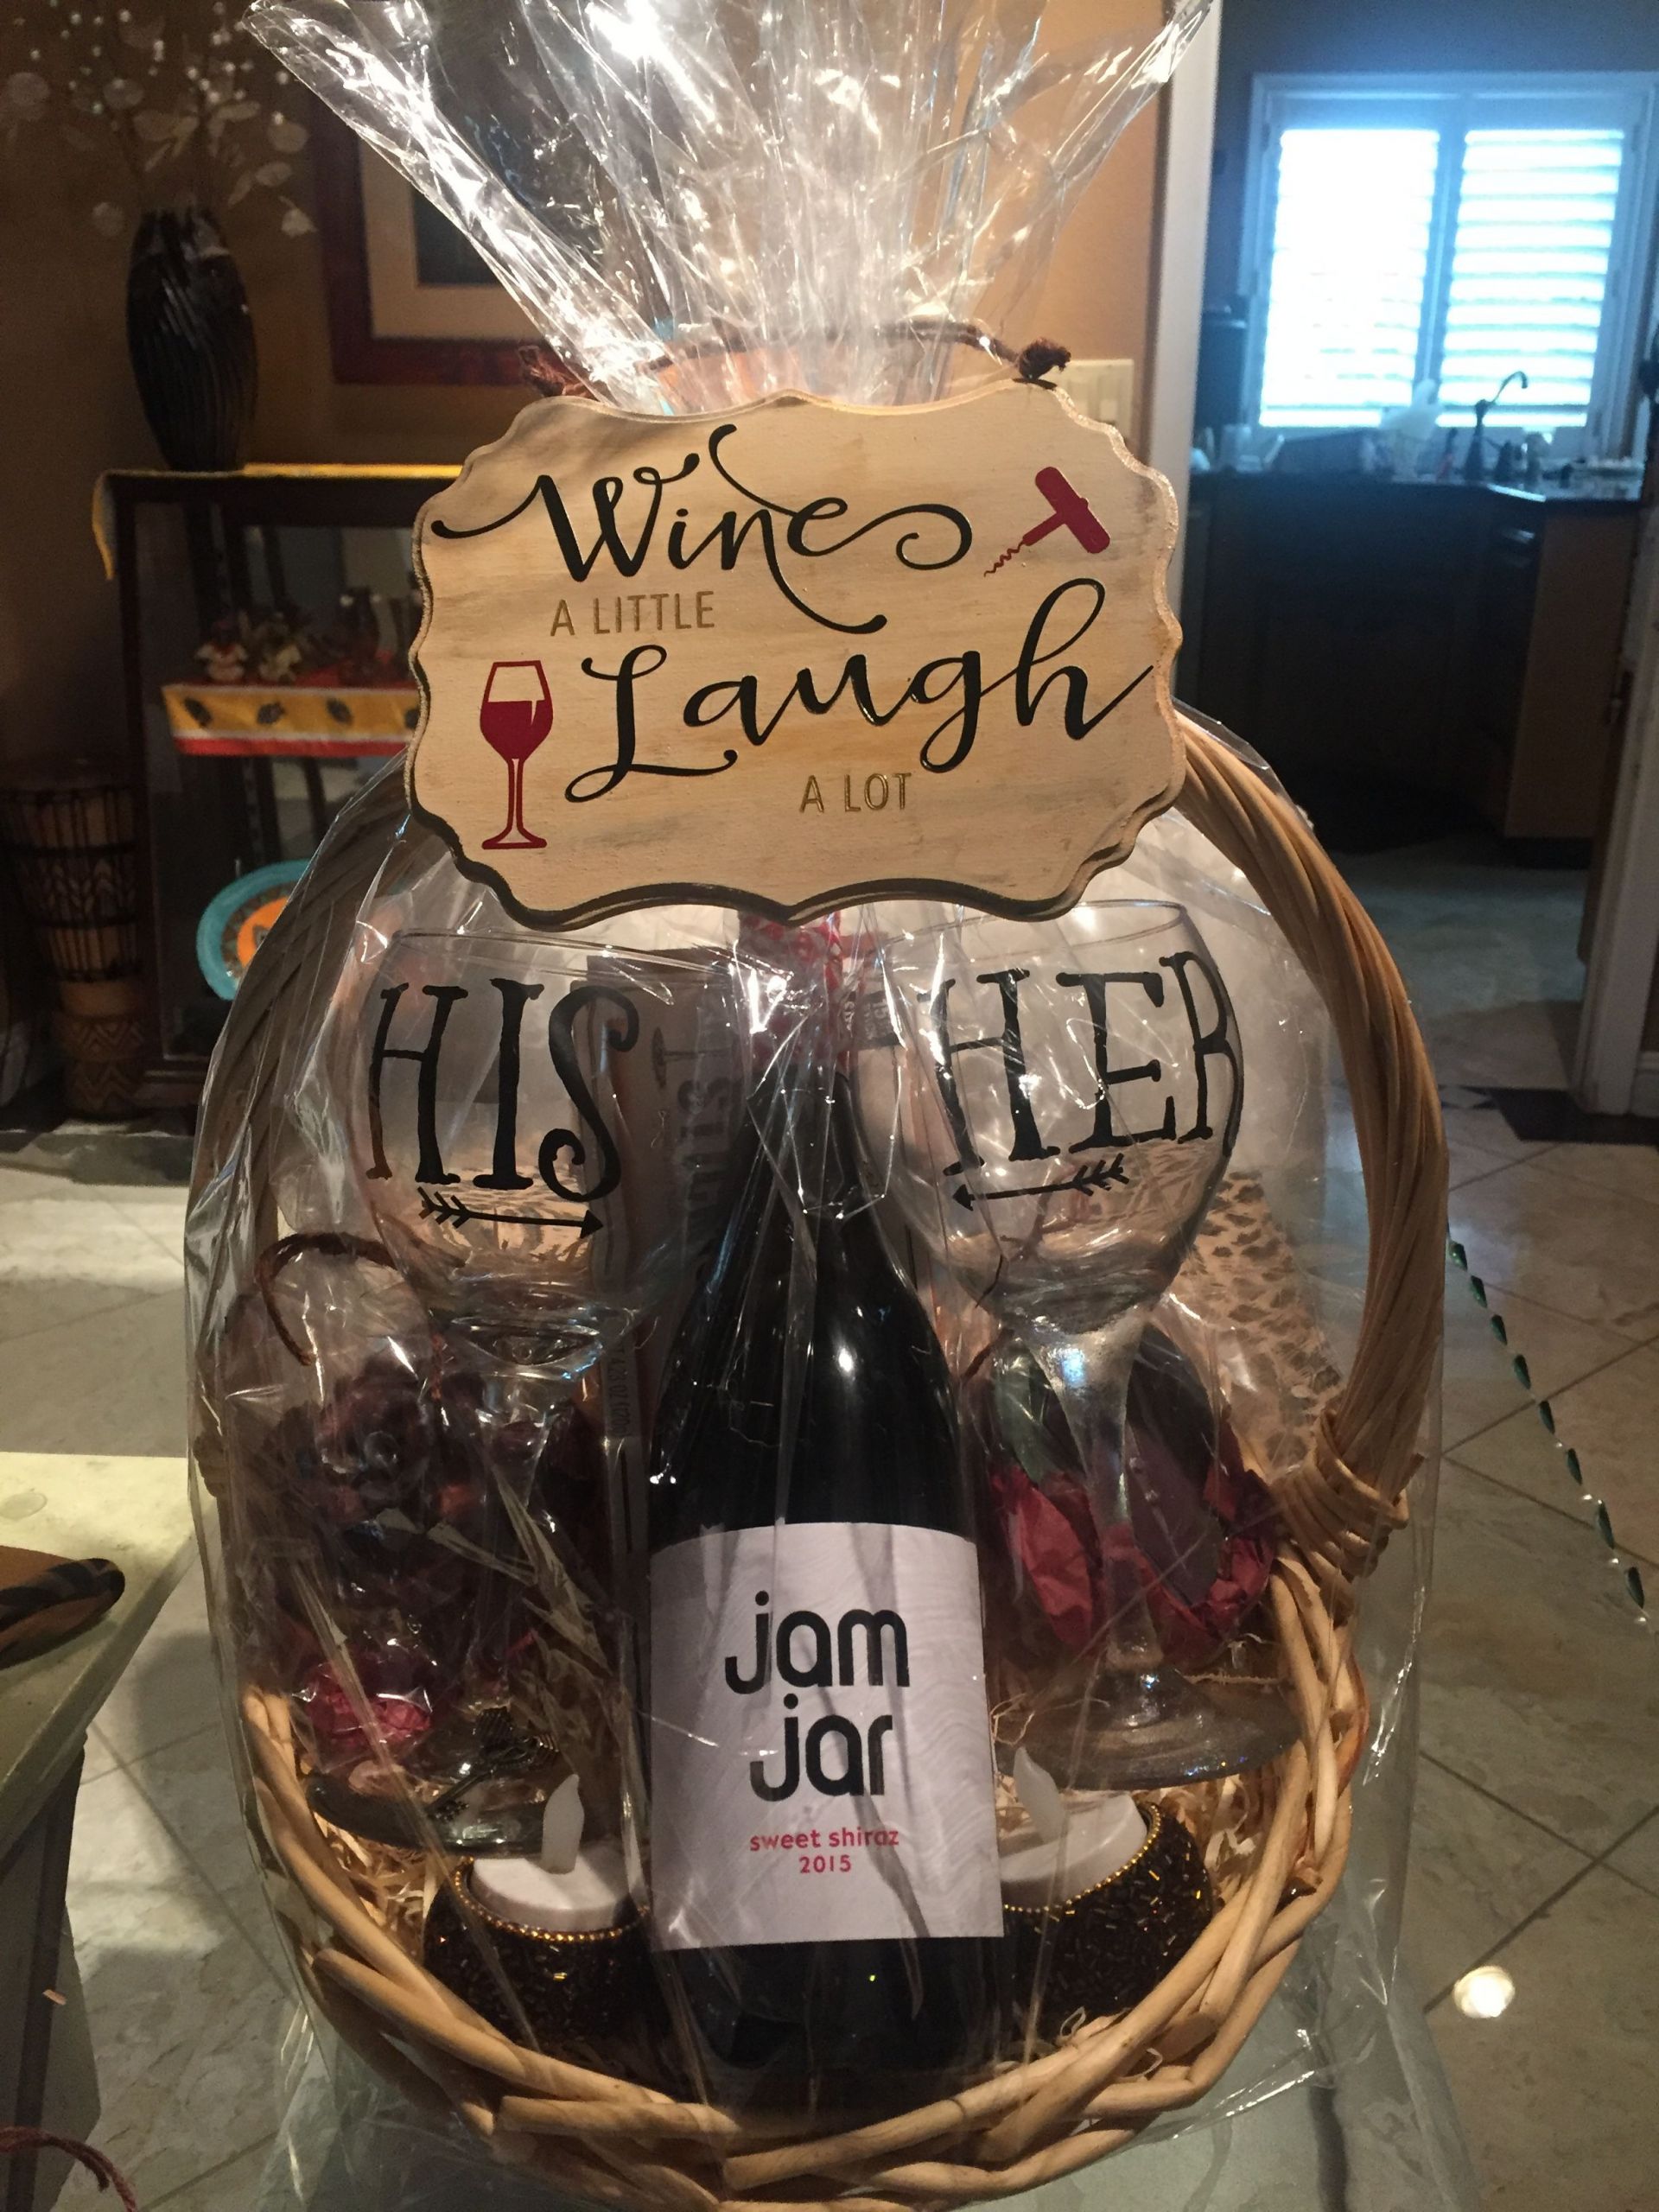 Wine Themed Gift Basket Ideas
 Wine basket for March of Dimes fundraiser …